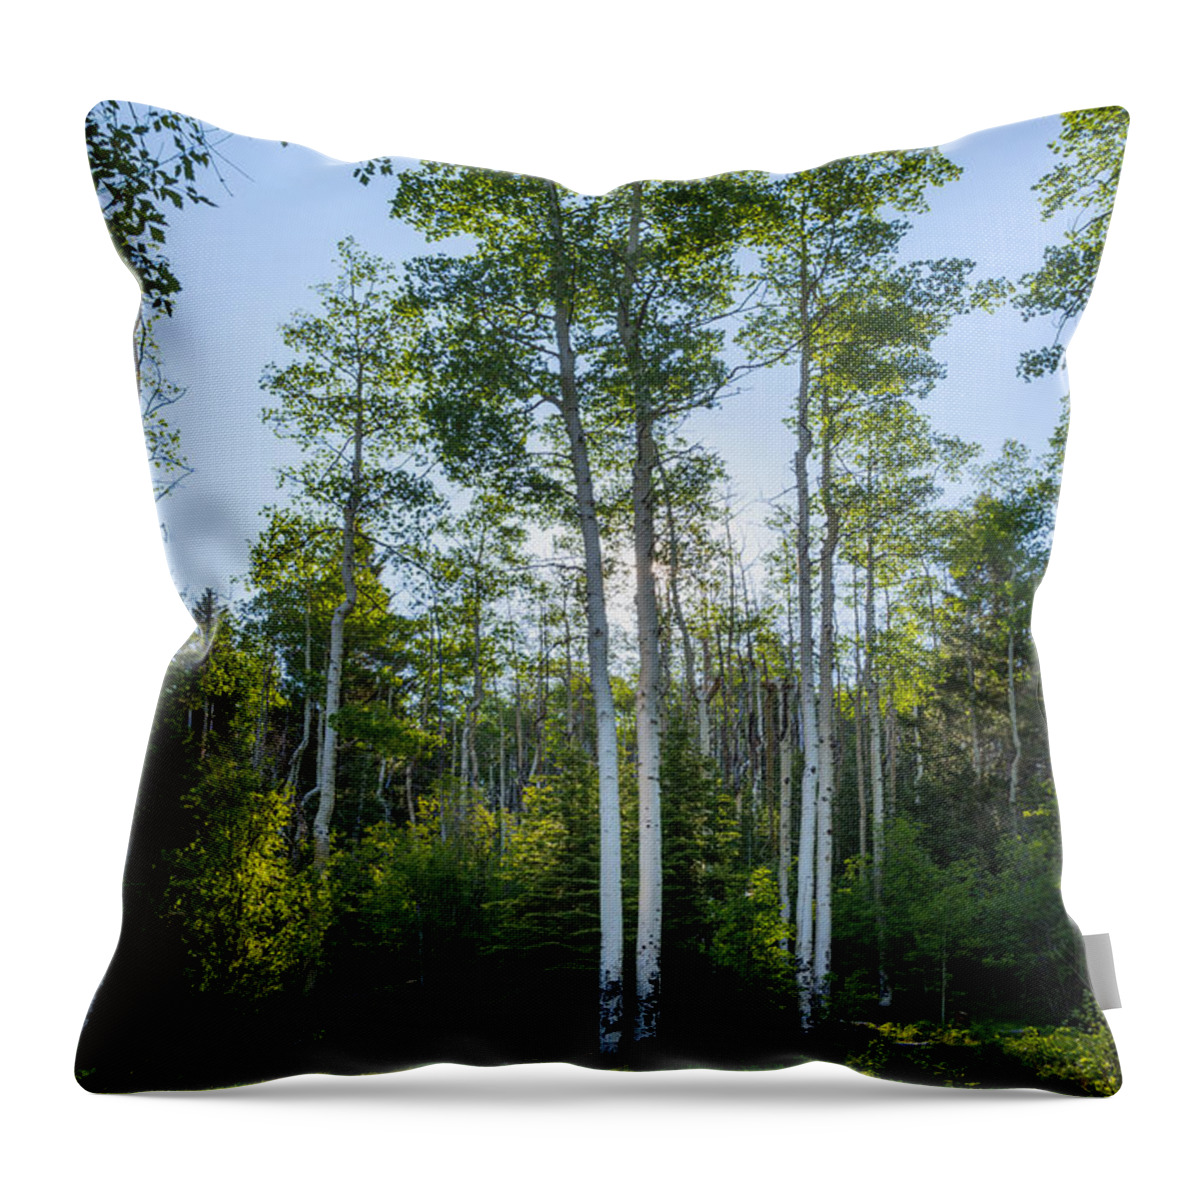 Aspen Throw Pillow featuring the photograph Aspens At Sunrise 1 - Santa Fe New Mexico by Brian Harig